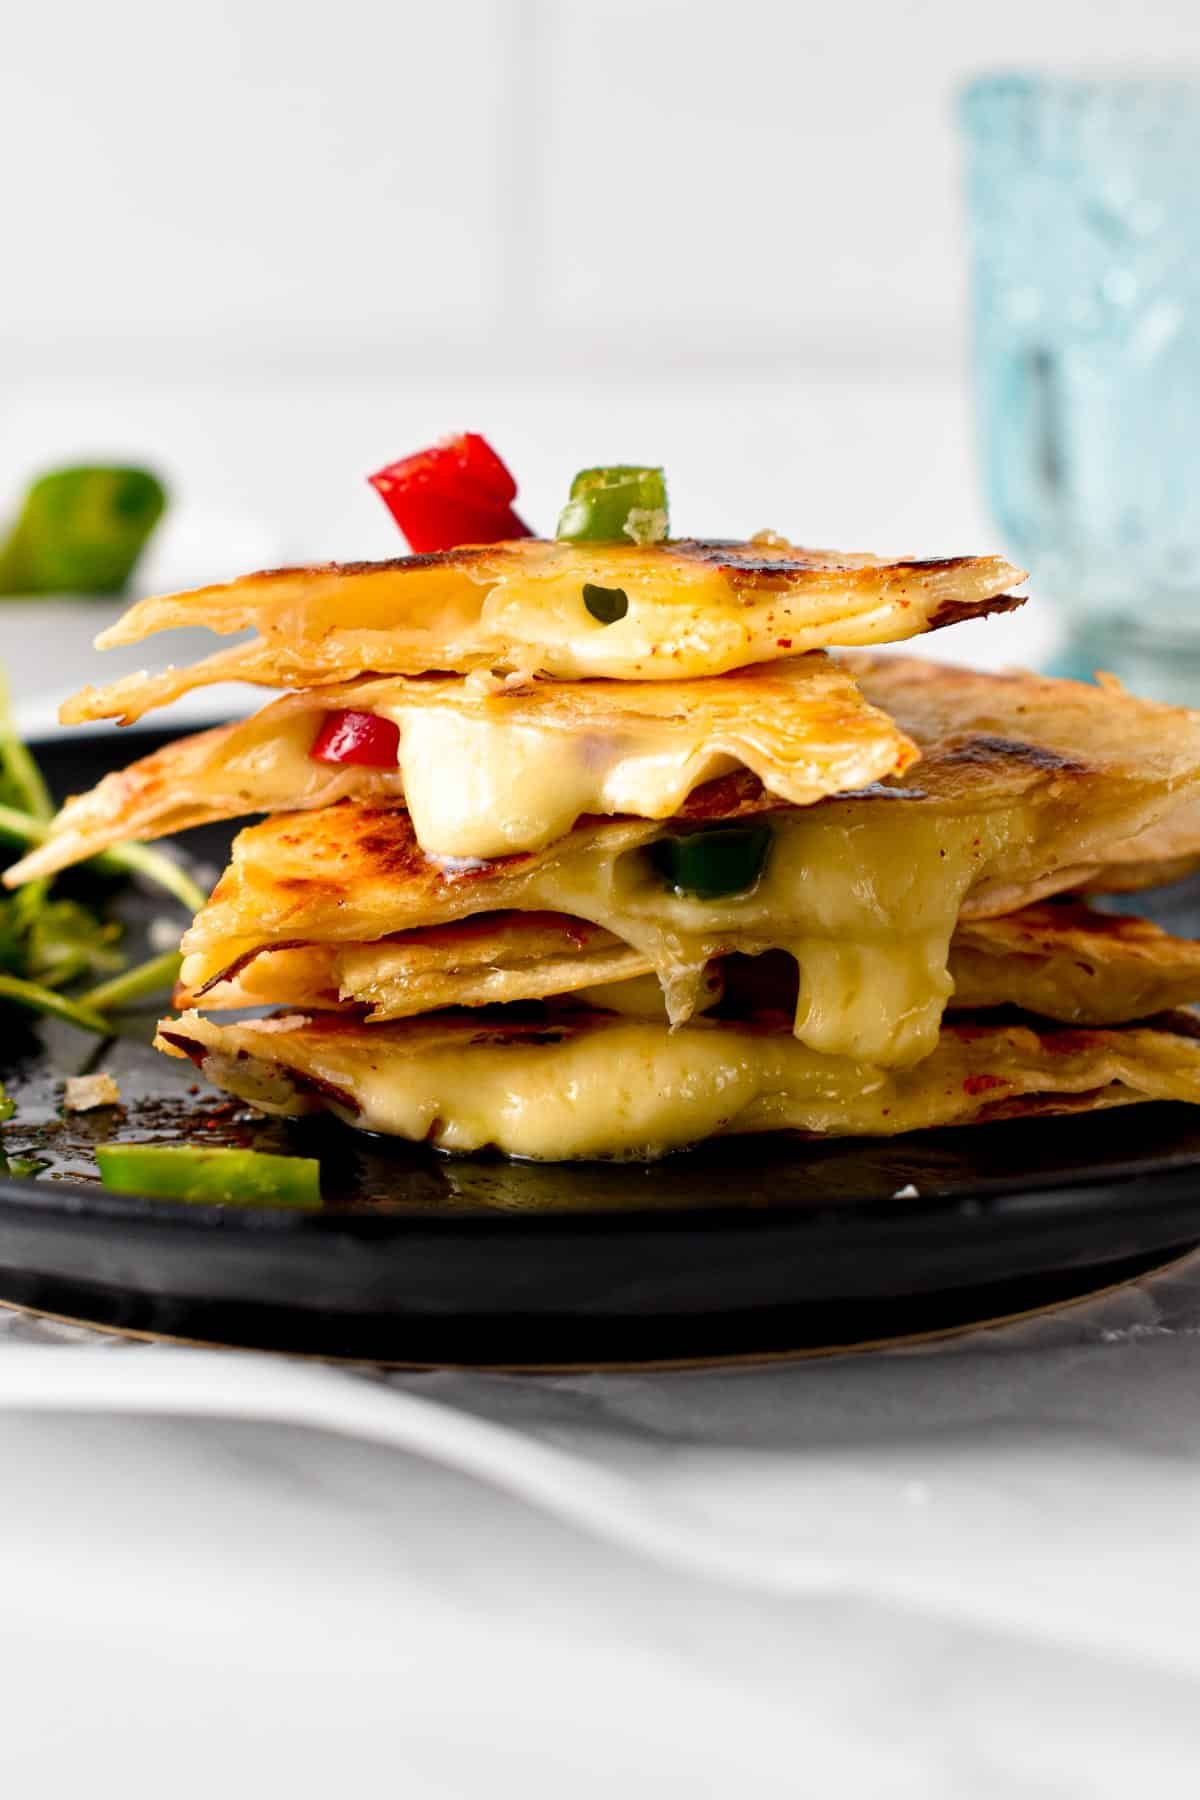 This easy Cheese Quesadilla also called Queso quesadilla is a crispy flour tortilla filled with stringy melted cheese and pieces of jalapeno. This is the perfect 10 minutes lunch for cheese lovers, easy to adapt by throwing in any extra vegetables or proteins you have on hand.